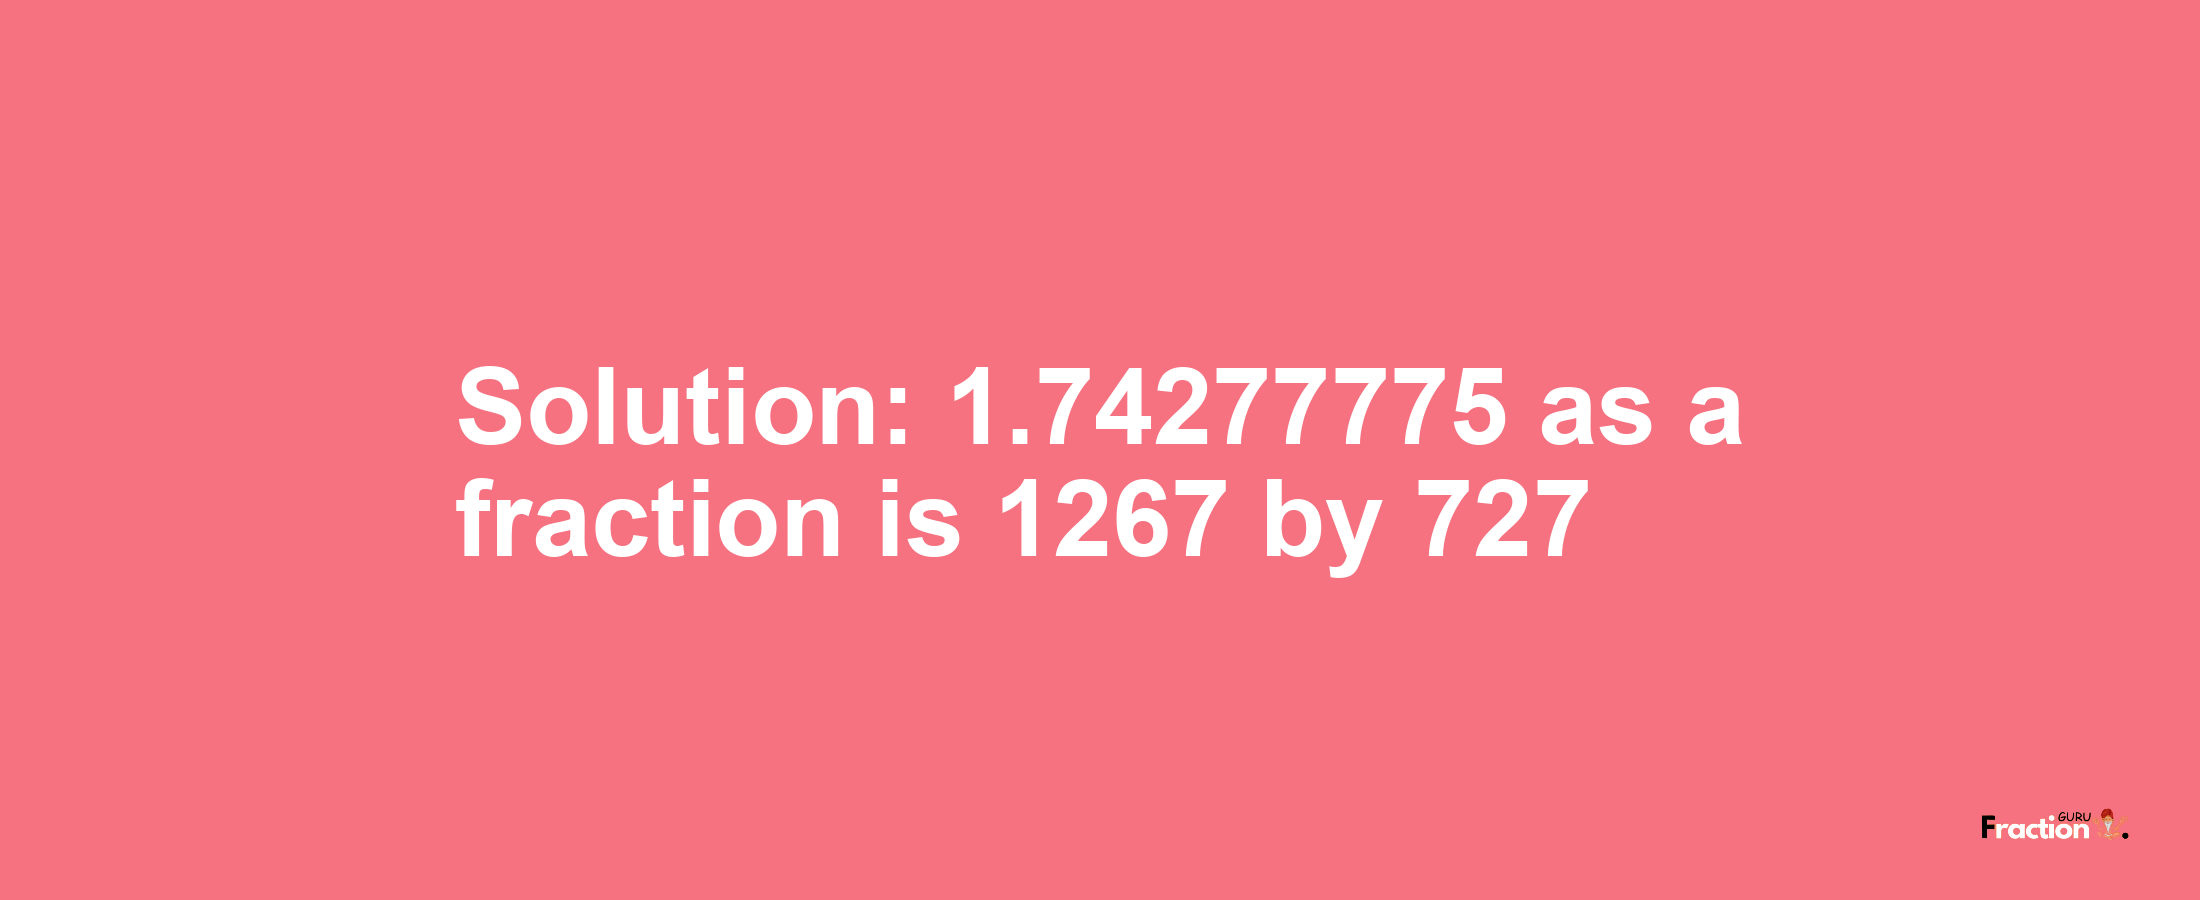 Solution:1.74277775 as a fraction is 1267/727